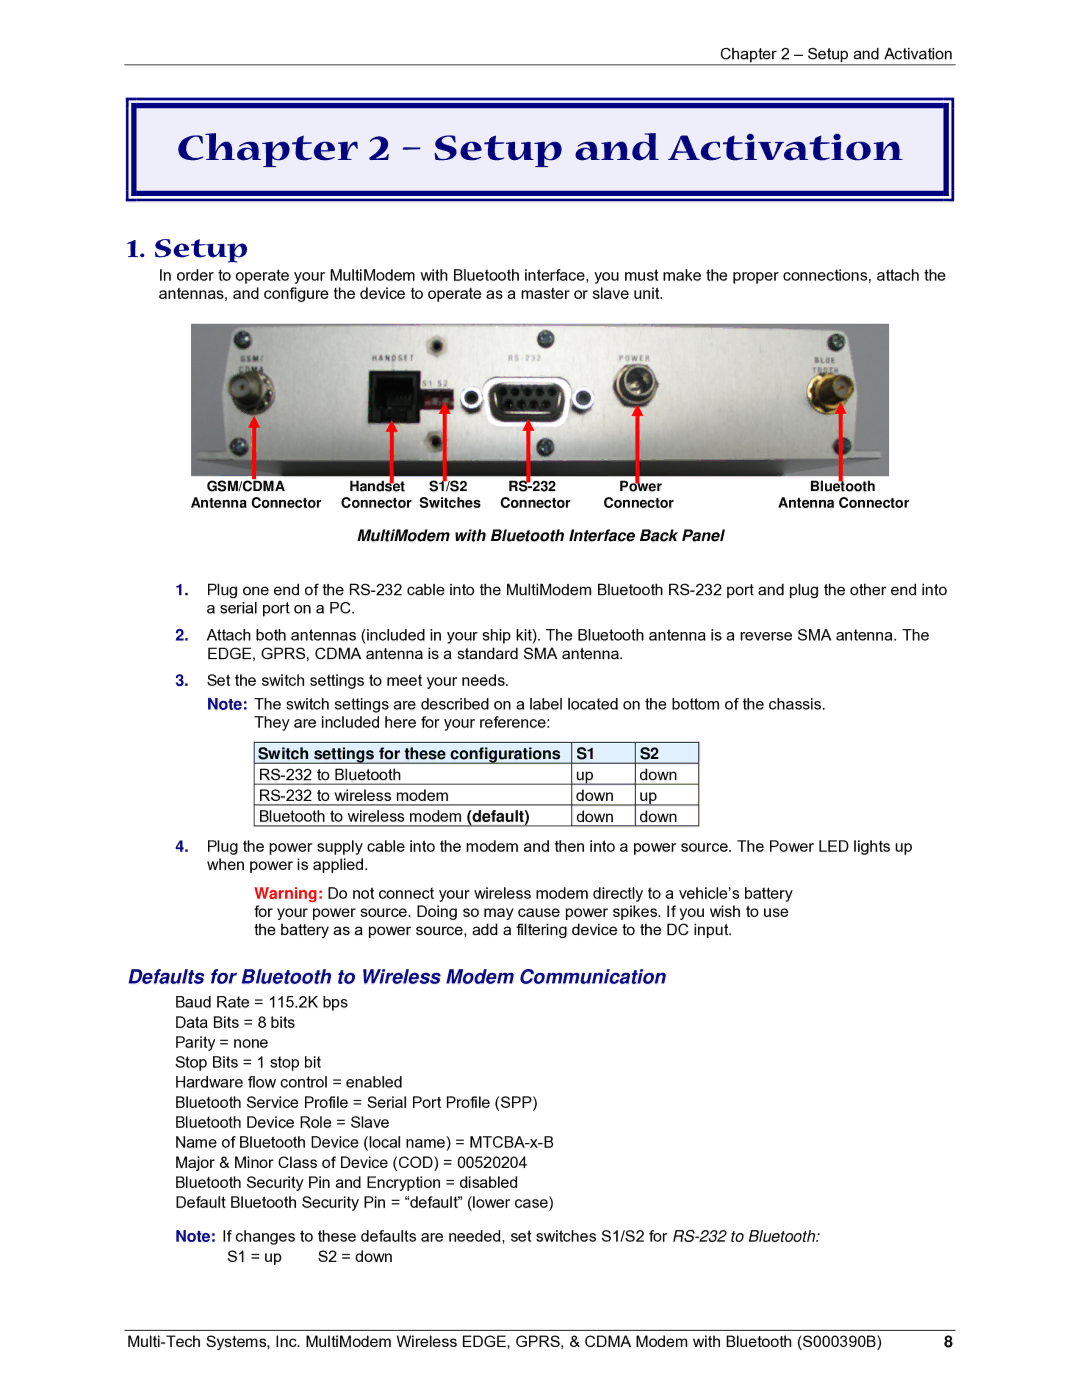 Multi-Tech Systems MultiModem manual Setup and Activation, Switch settings for these configurations 